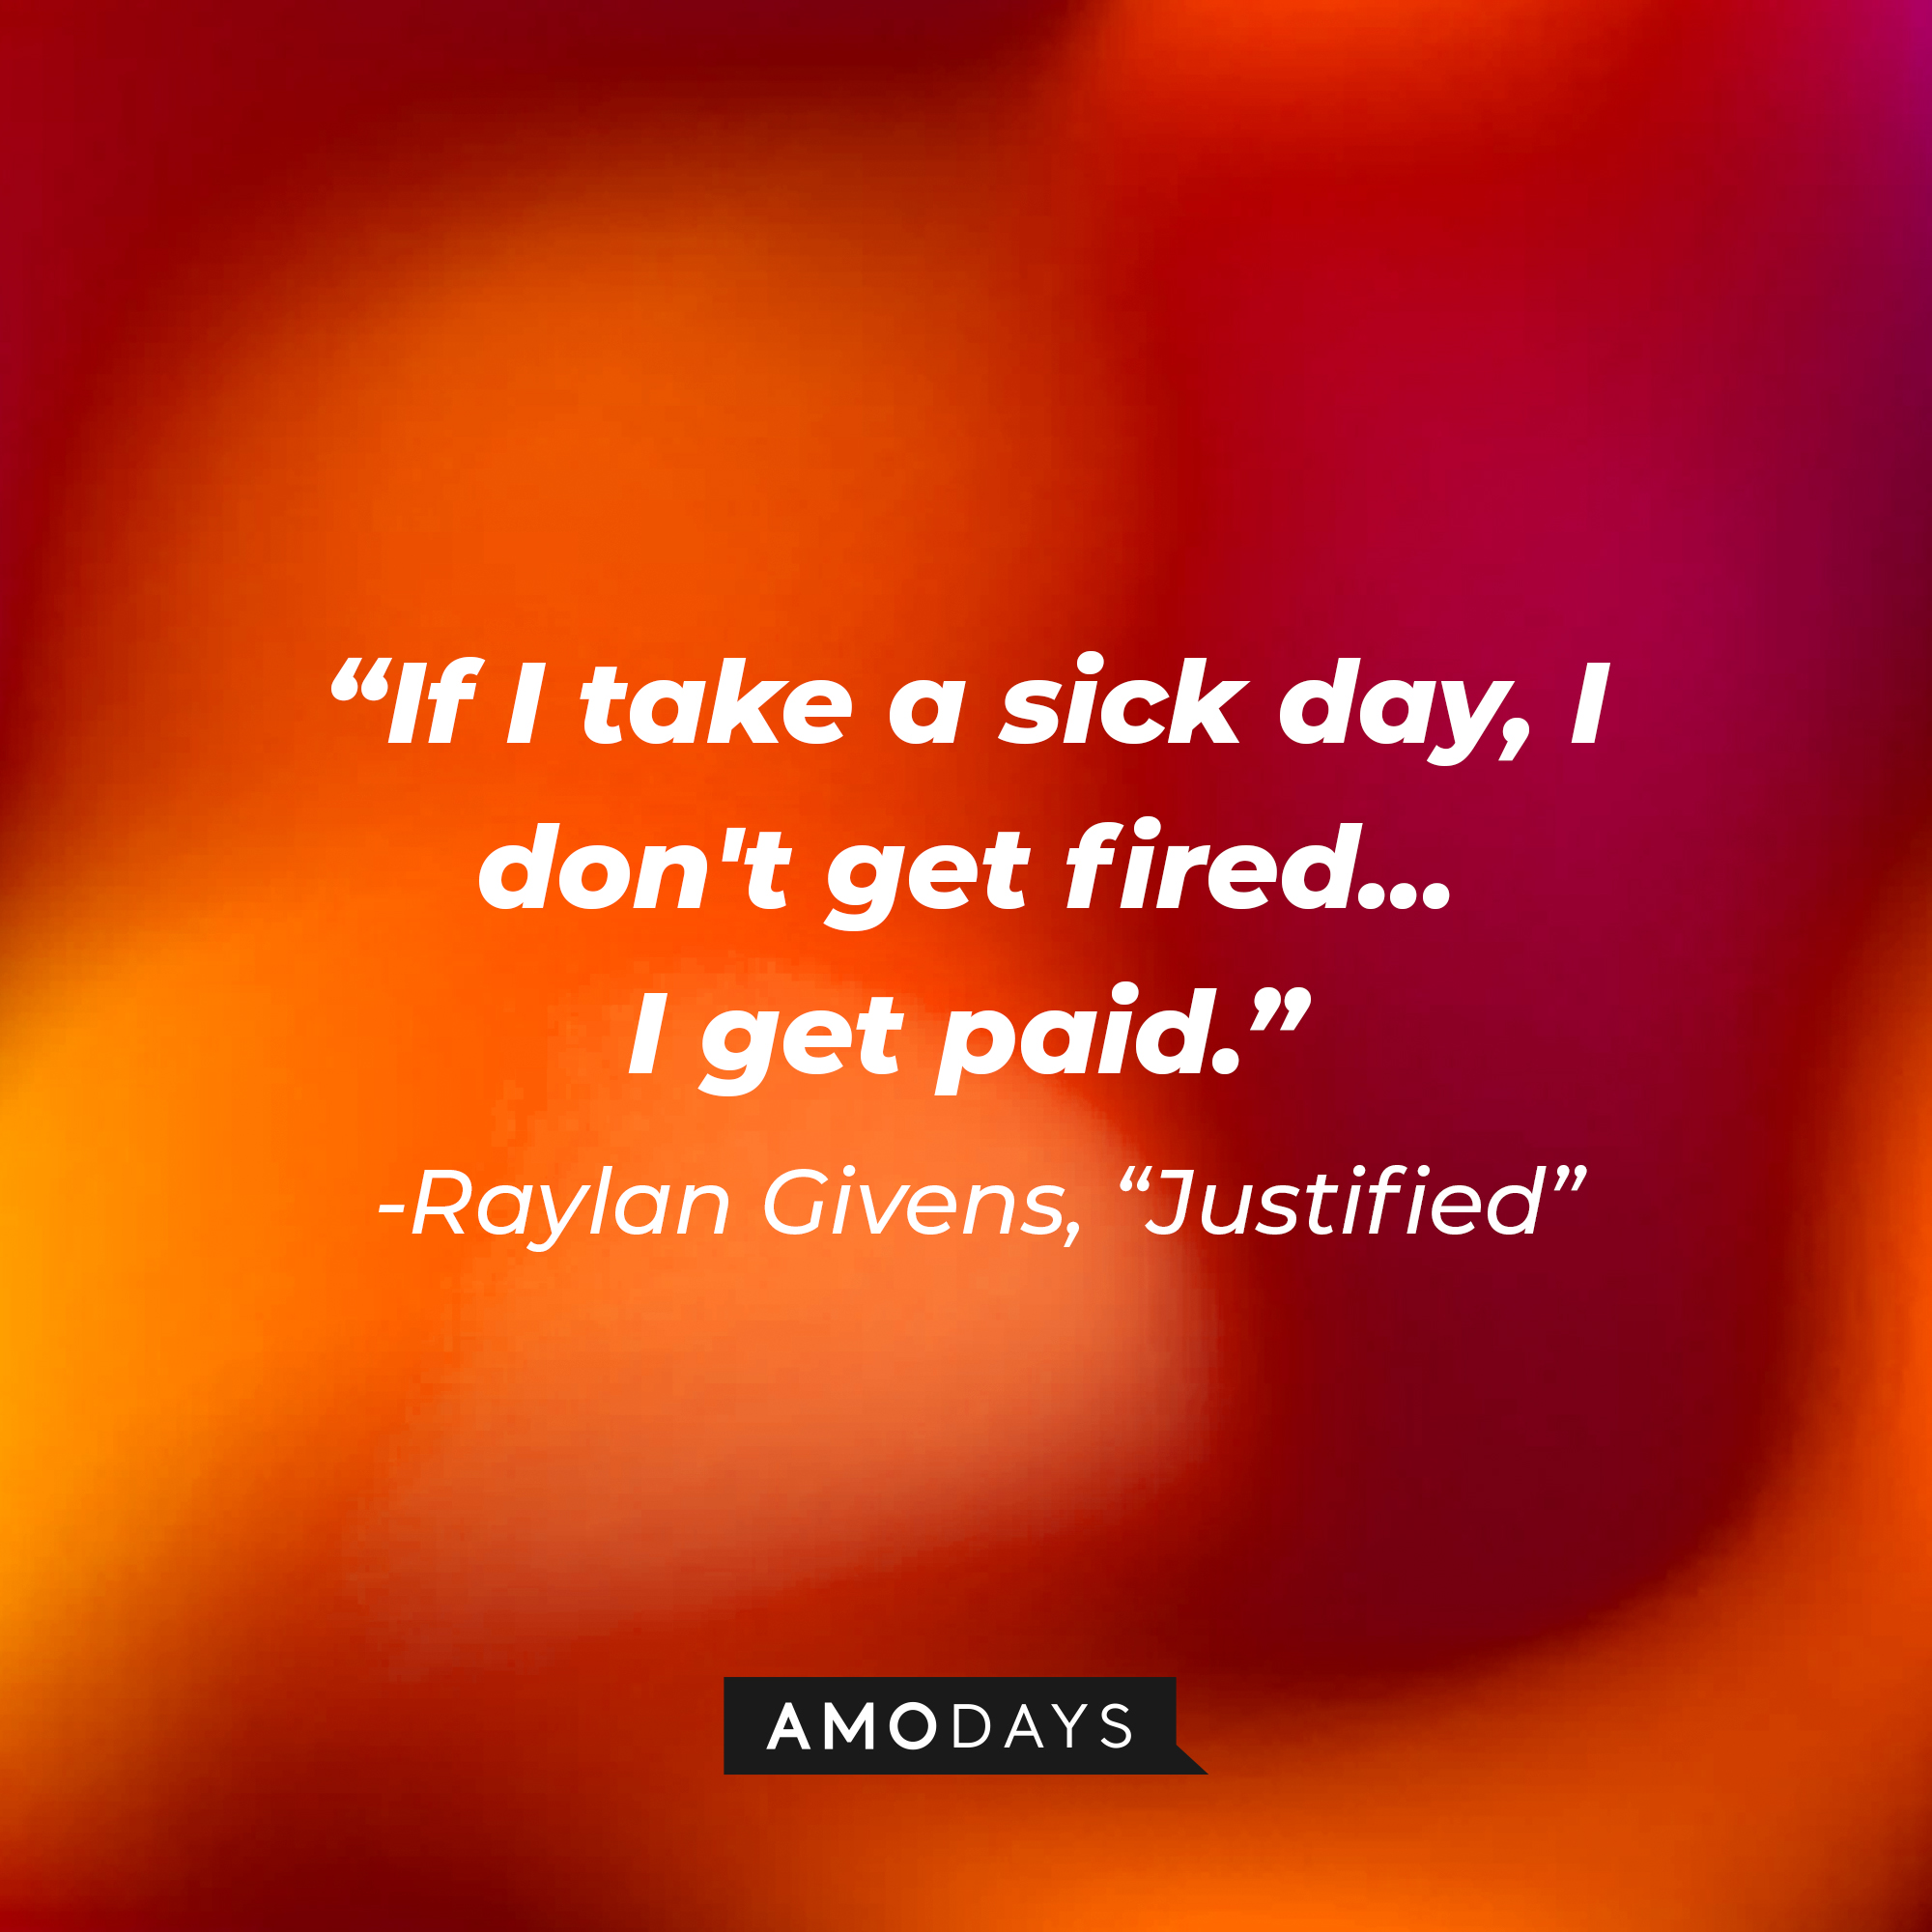 Raylan Givens’ quote from “Justified”: “If I take a sick day, I don't get fired...I get paid.” | Source: AmoDays